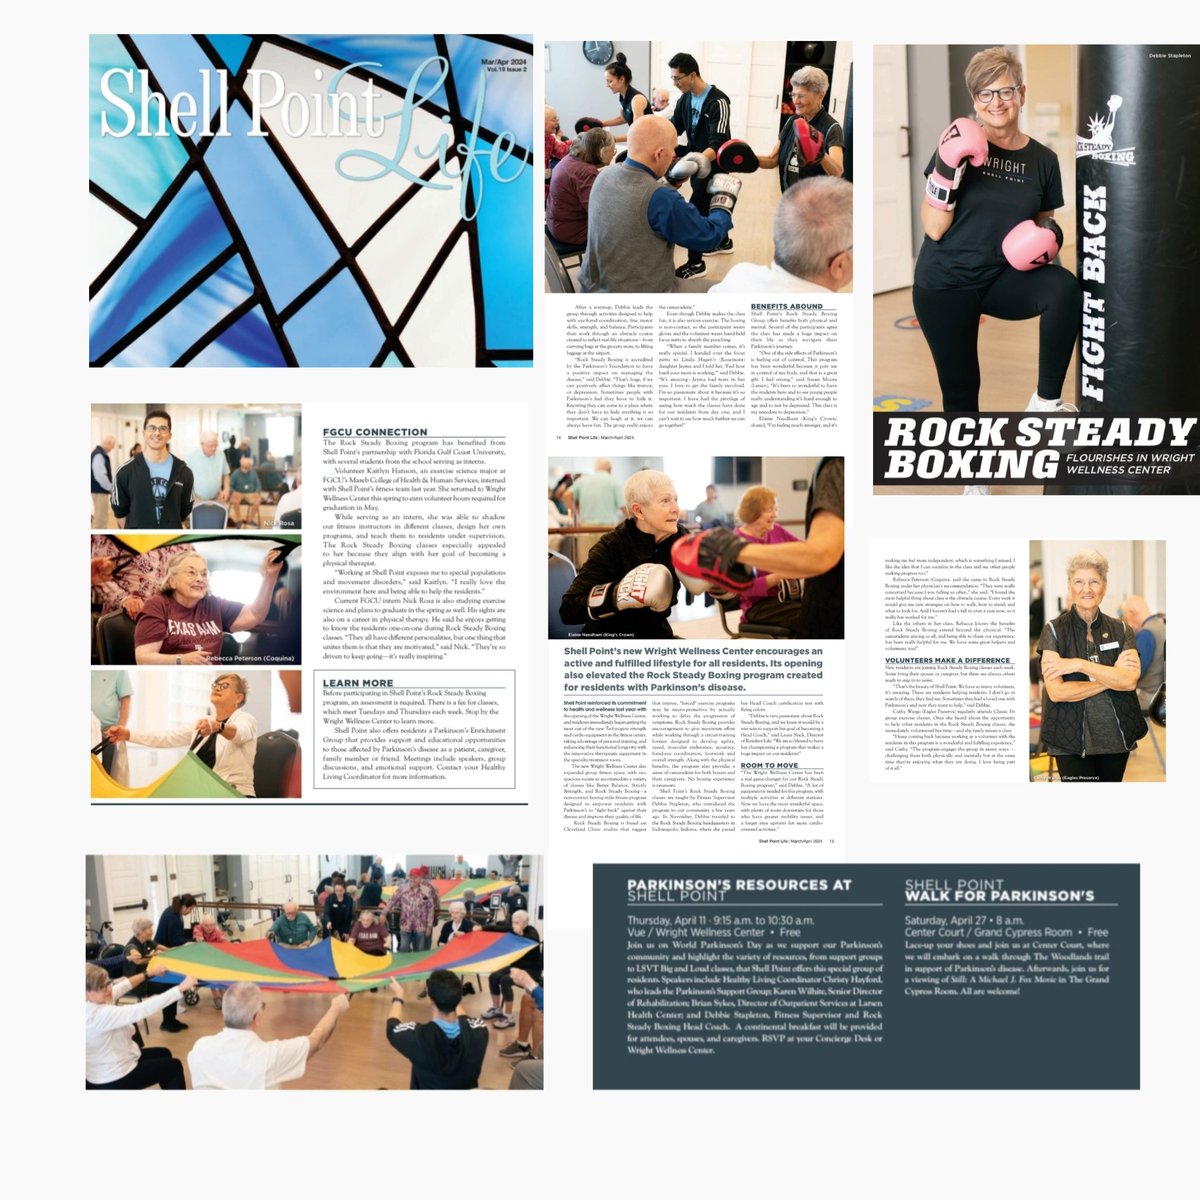 Nicholas is featured in The March Issue of Shell Point Life magazine. Highlights His FGCU internship work with Head Coach Debbie Stapleton, at Shell Point Retirement Community. Nicholas loves working with The Rock Steady Boxing program and is passionate about making a difference